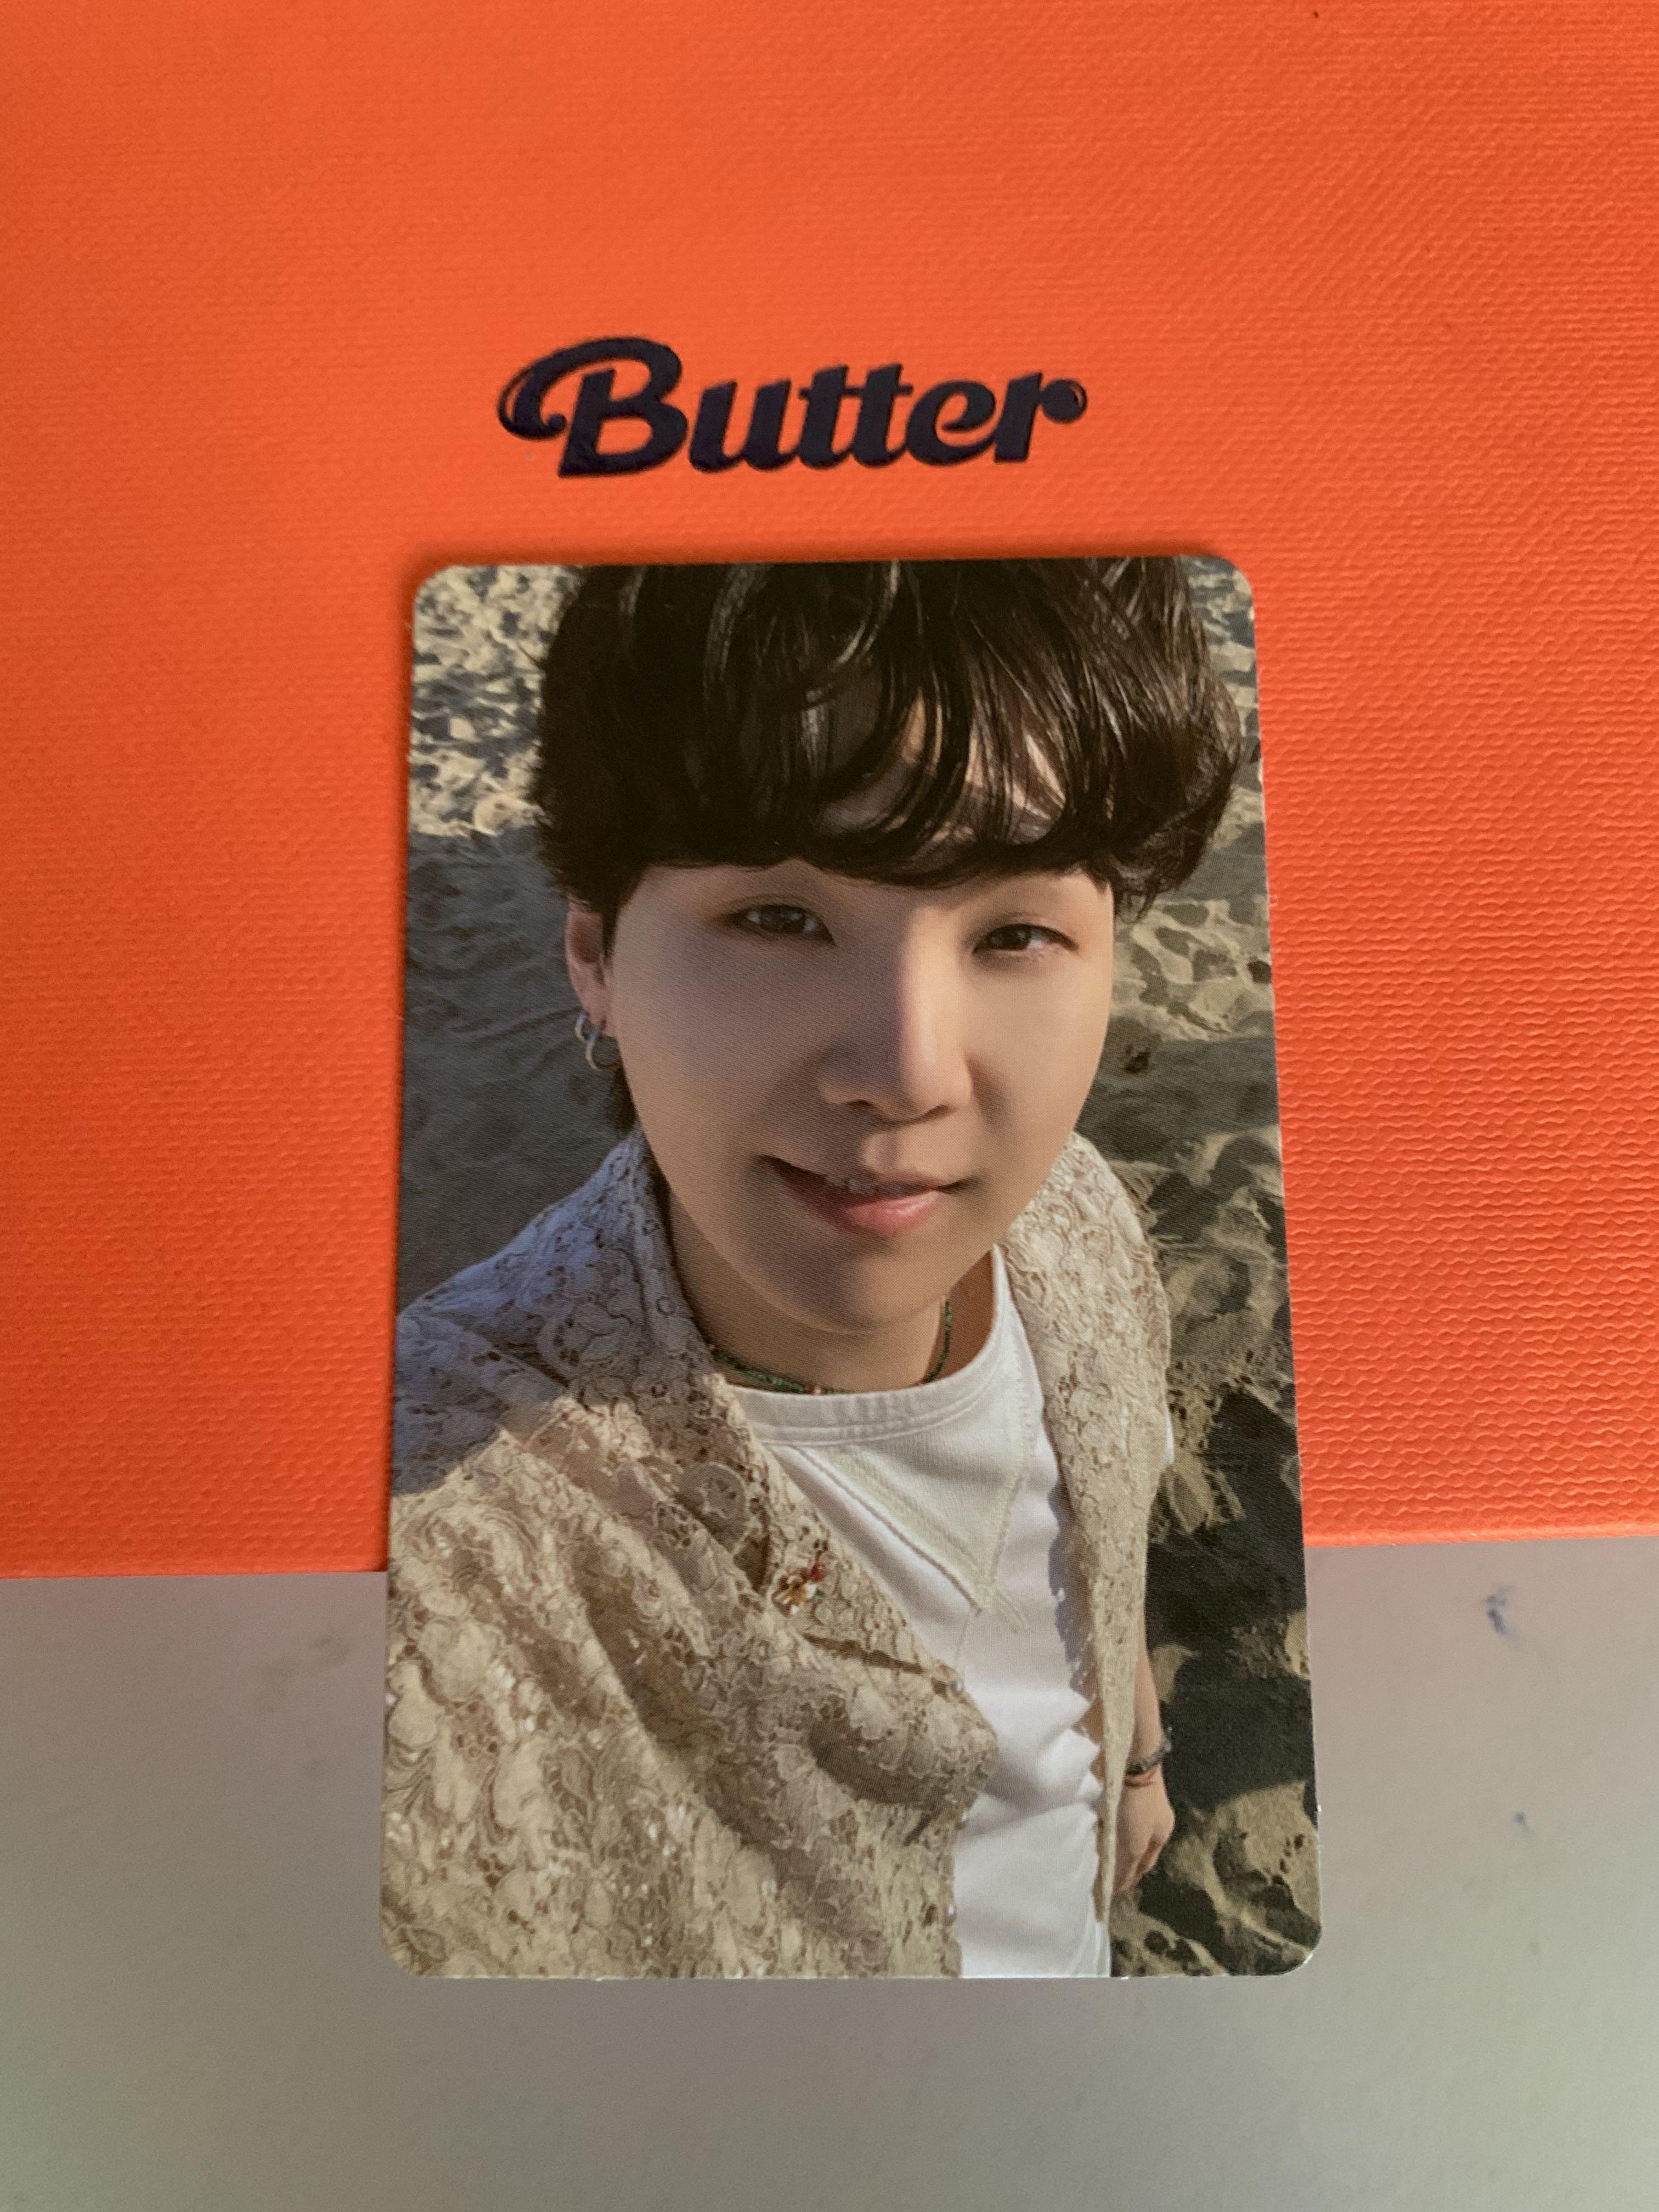 (Collect) BTS- Butter- Peaches Version (SUGA)